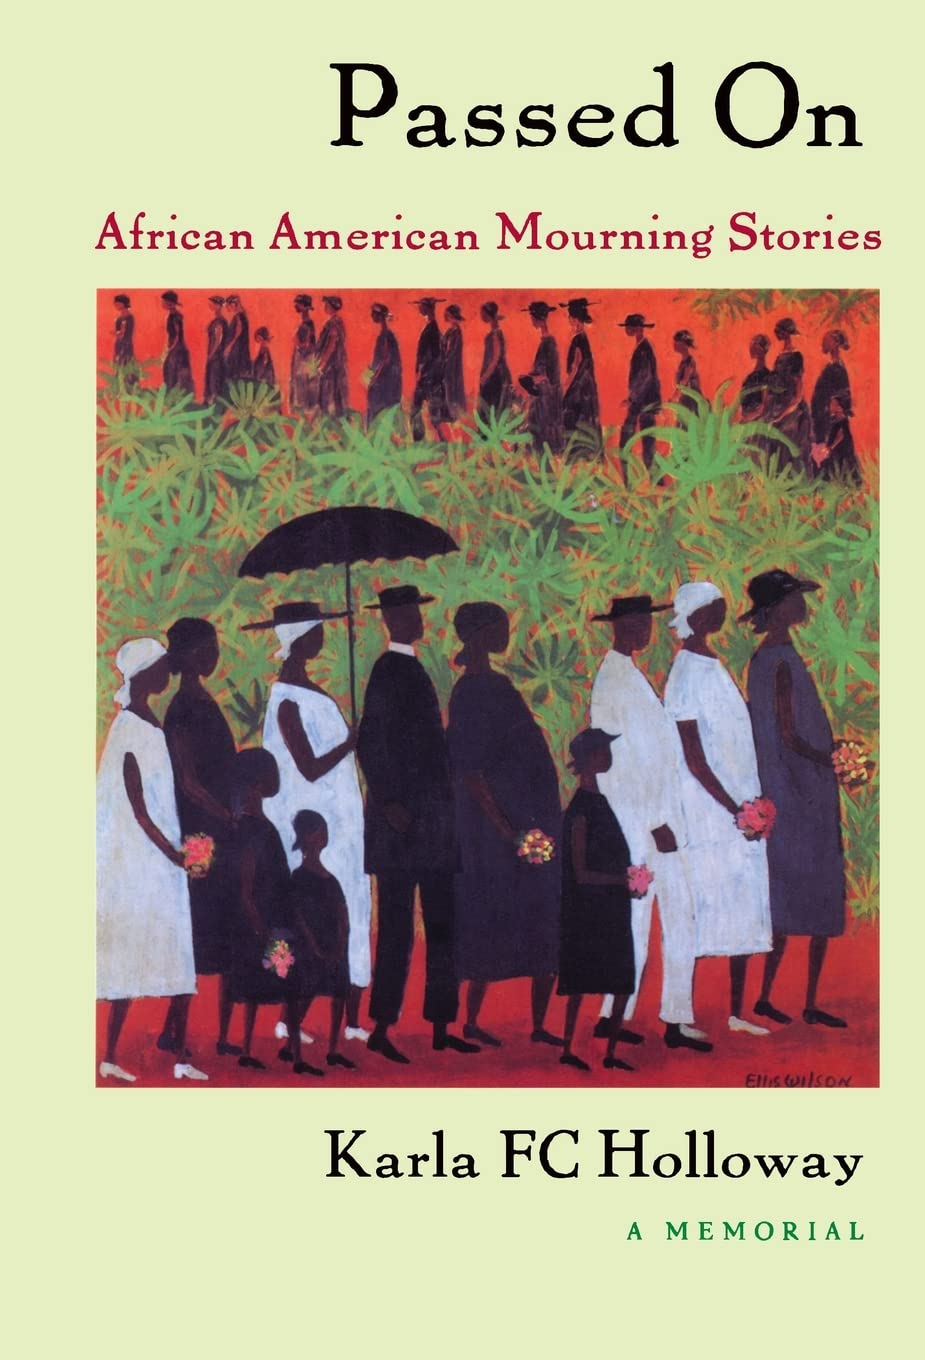 Passed on: African American Mourning Stories, a Memorial